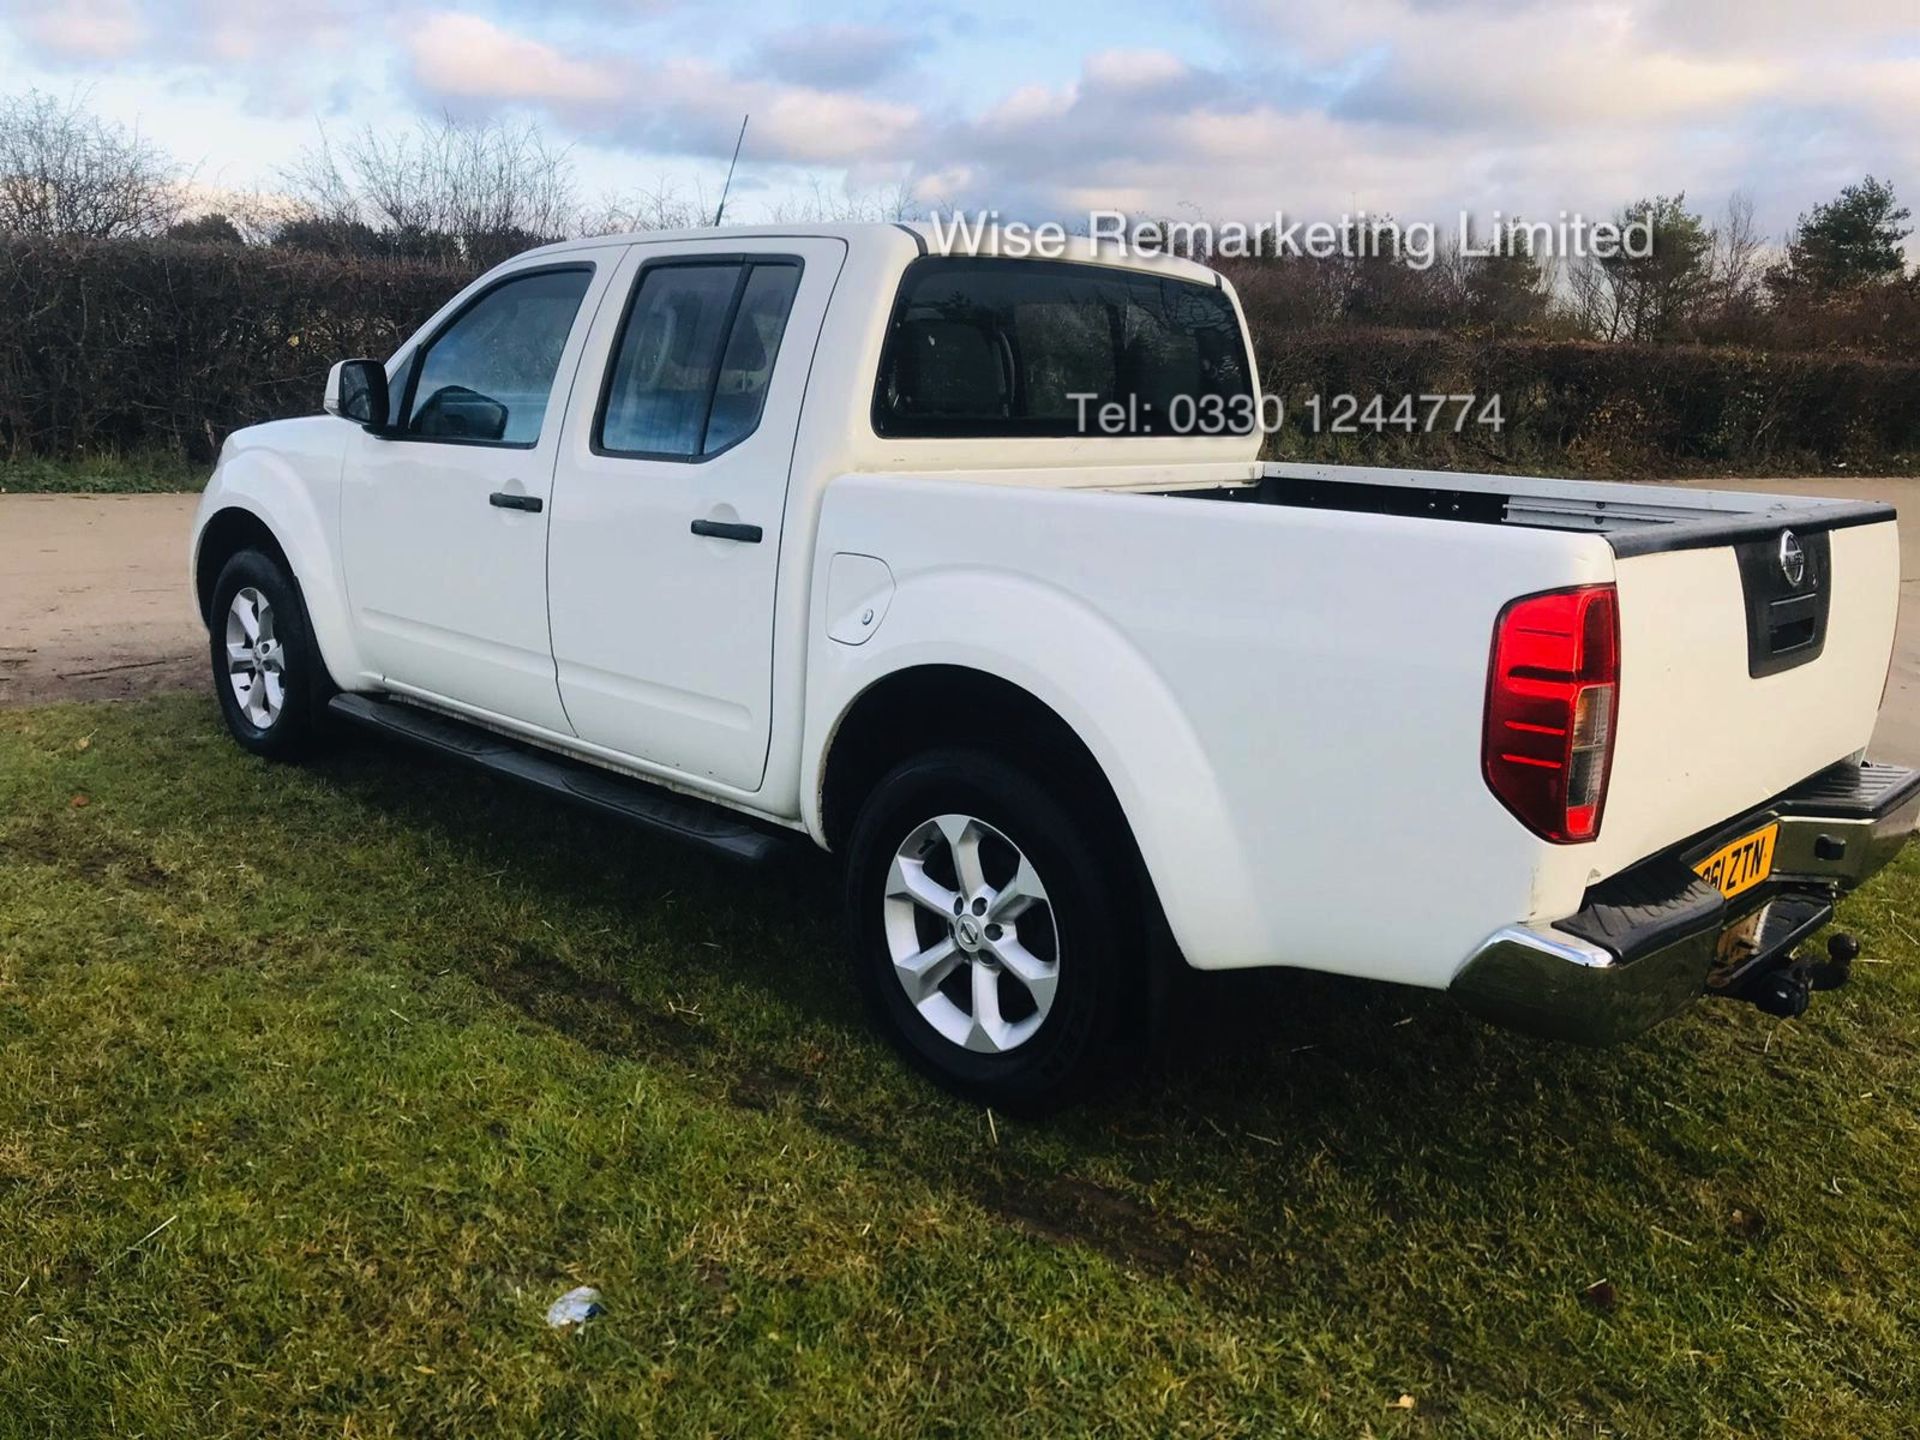 Nissan Navara Acentra 2.5 DCI - 2012 Model - Diamond White - 1 Keeper From New - Tow Bar - Image 6 of 20